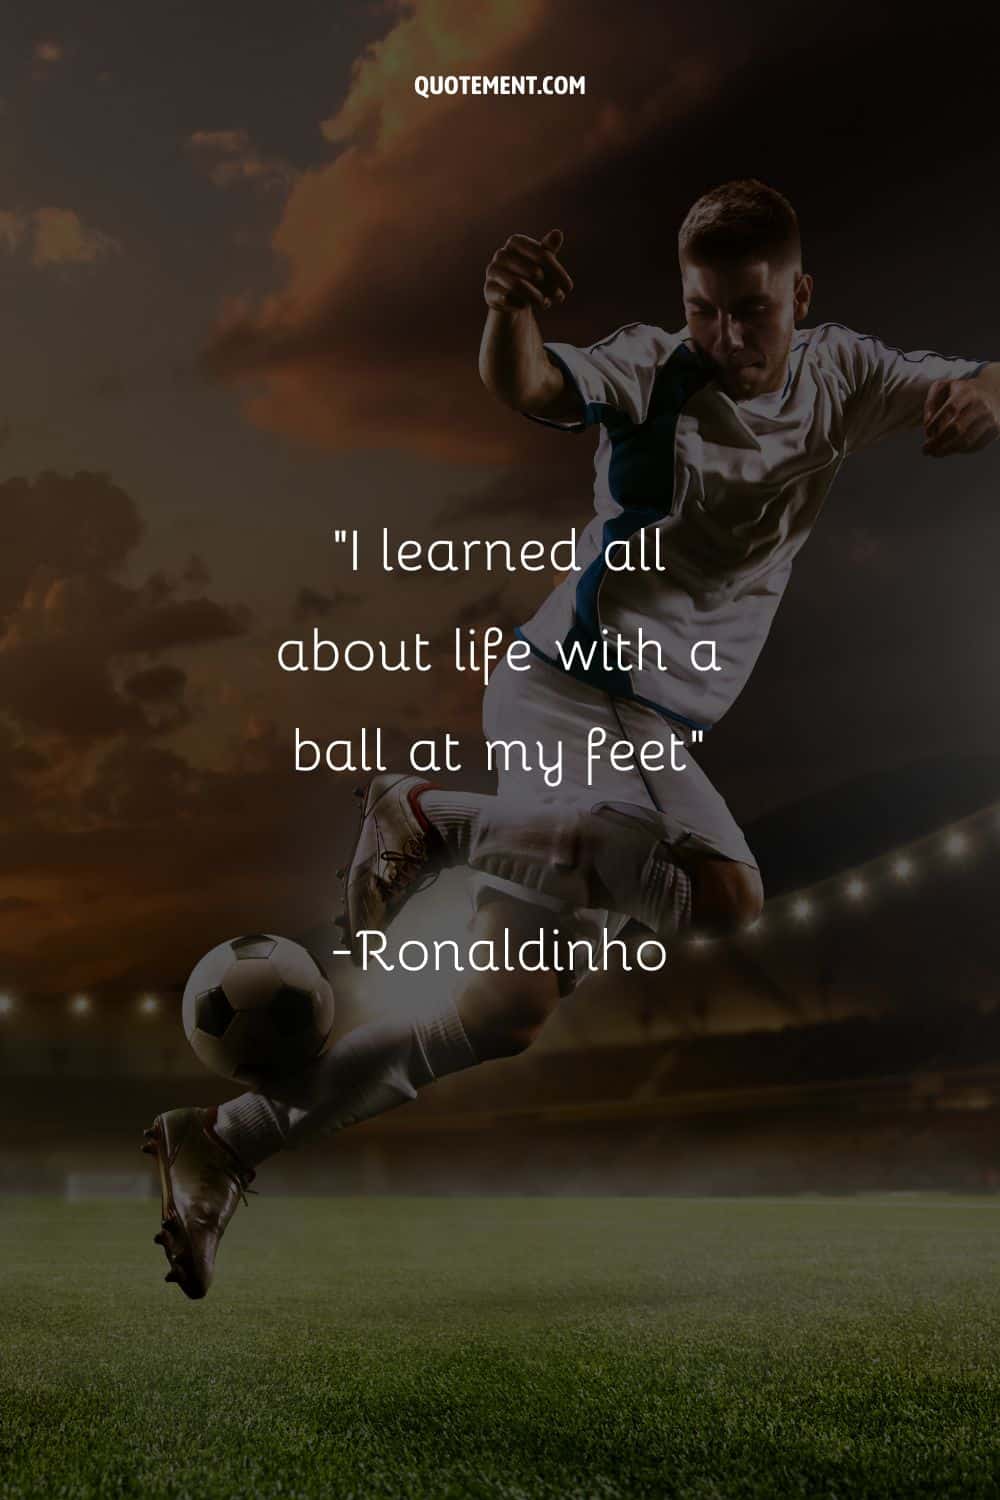 Lights converge on the ball and player representing inspiration soccer quote